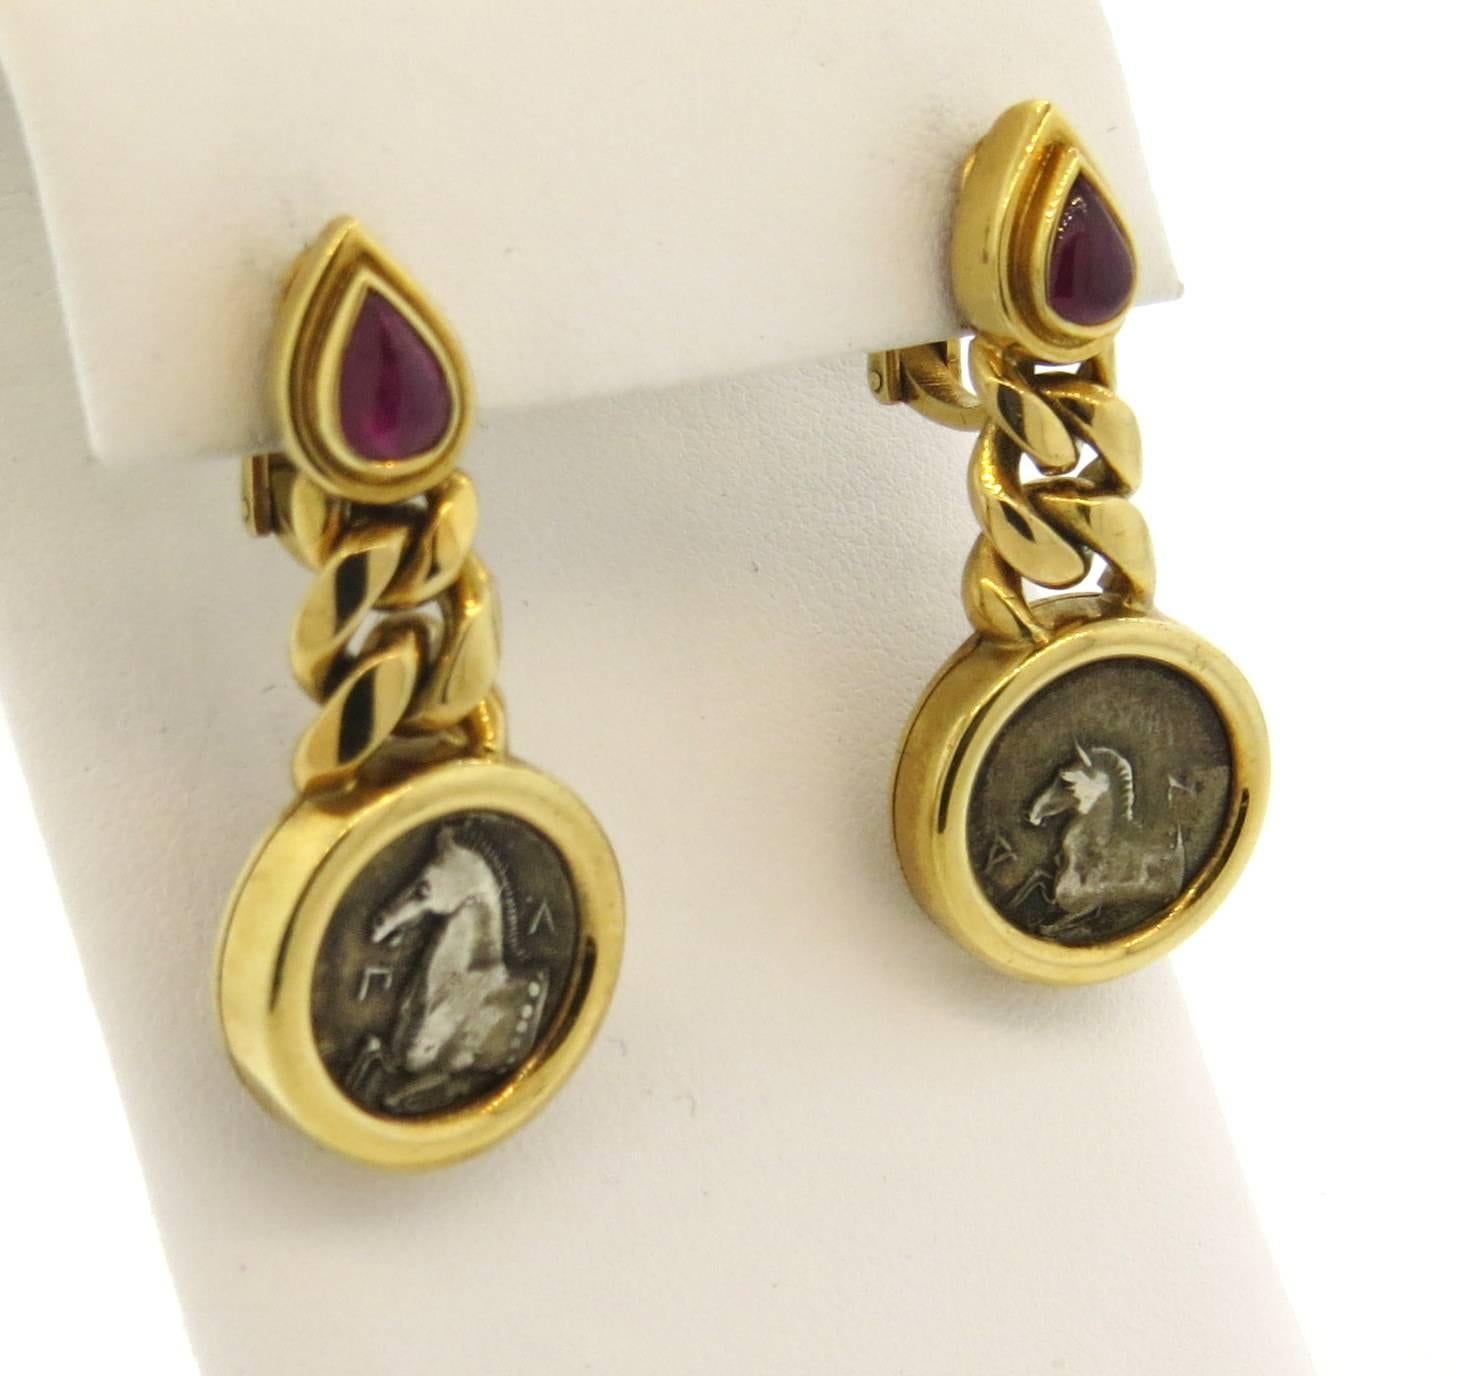 18k yellow gold Bulgari earrings, set with 13.5mm ancient coins and rubies. Earrings are 40mm long x 18mm at widest points (diameter of bottom) . Marked: Bvlgari, Thrace-Maroneia 4th cent. B.C, .B.A.2260,750.